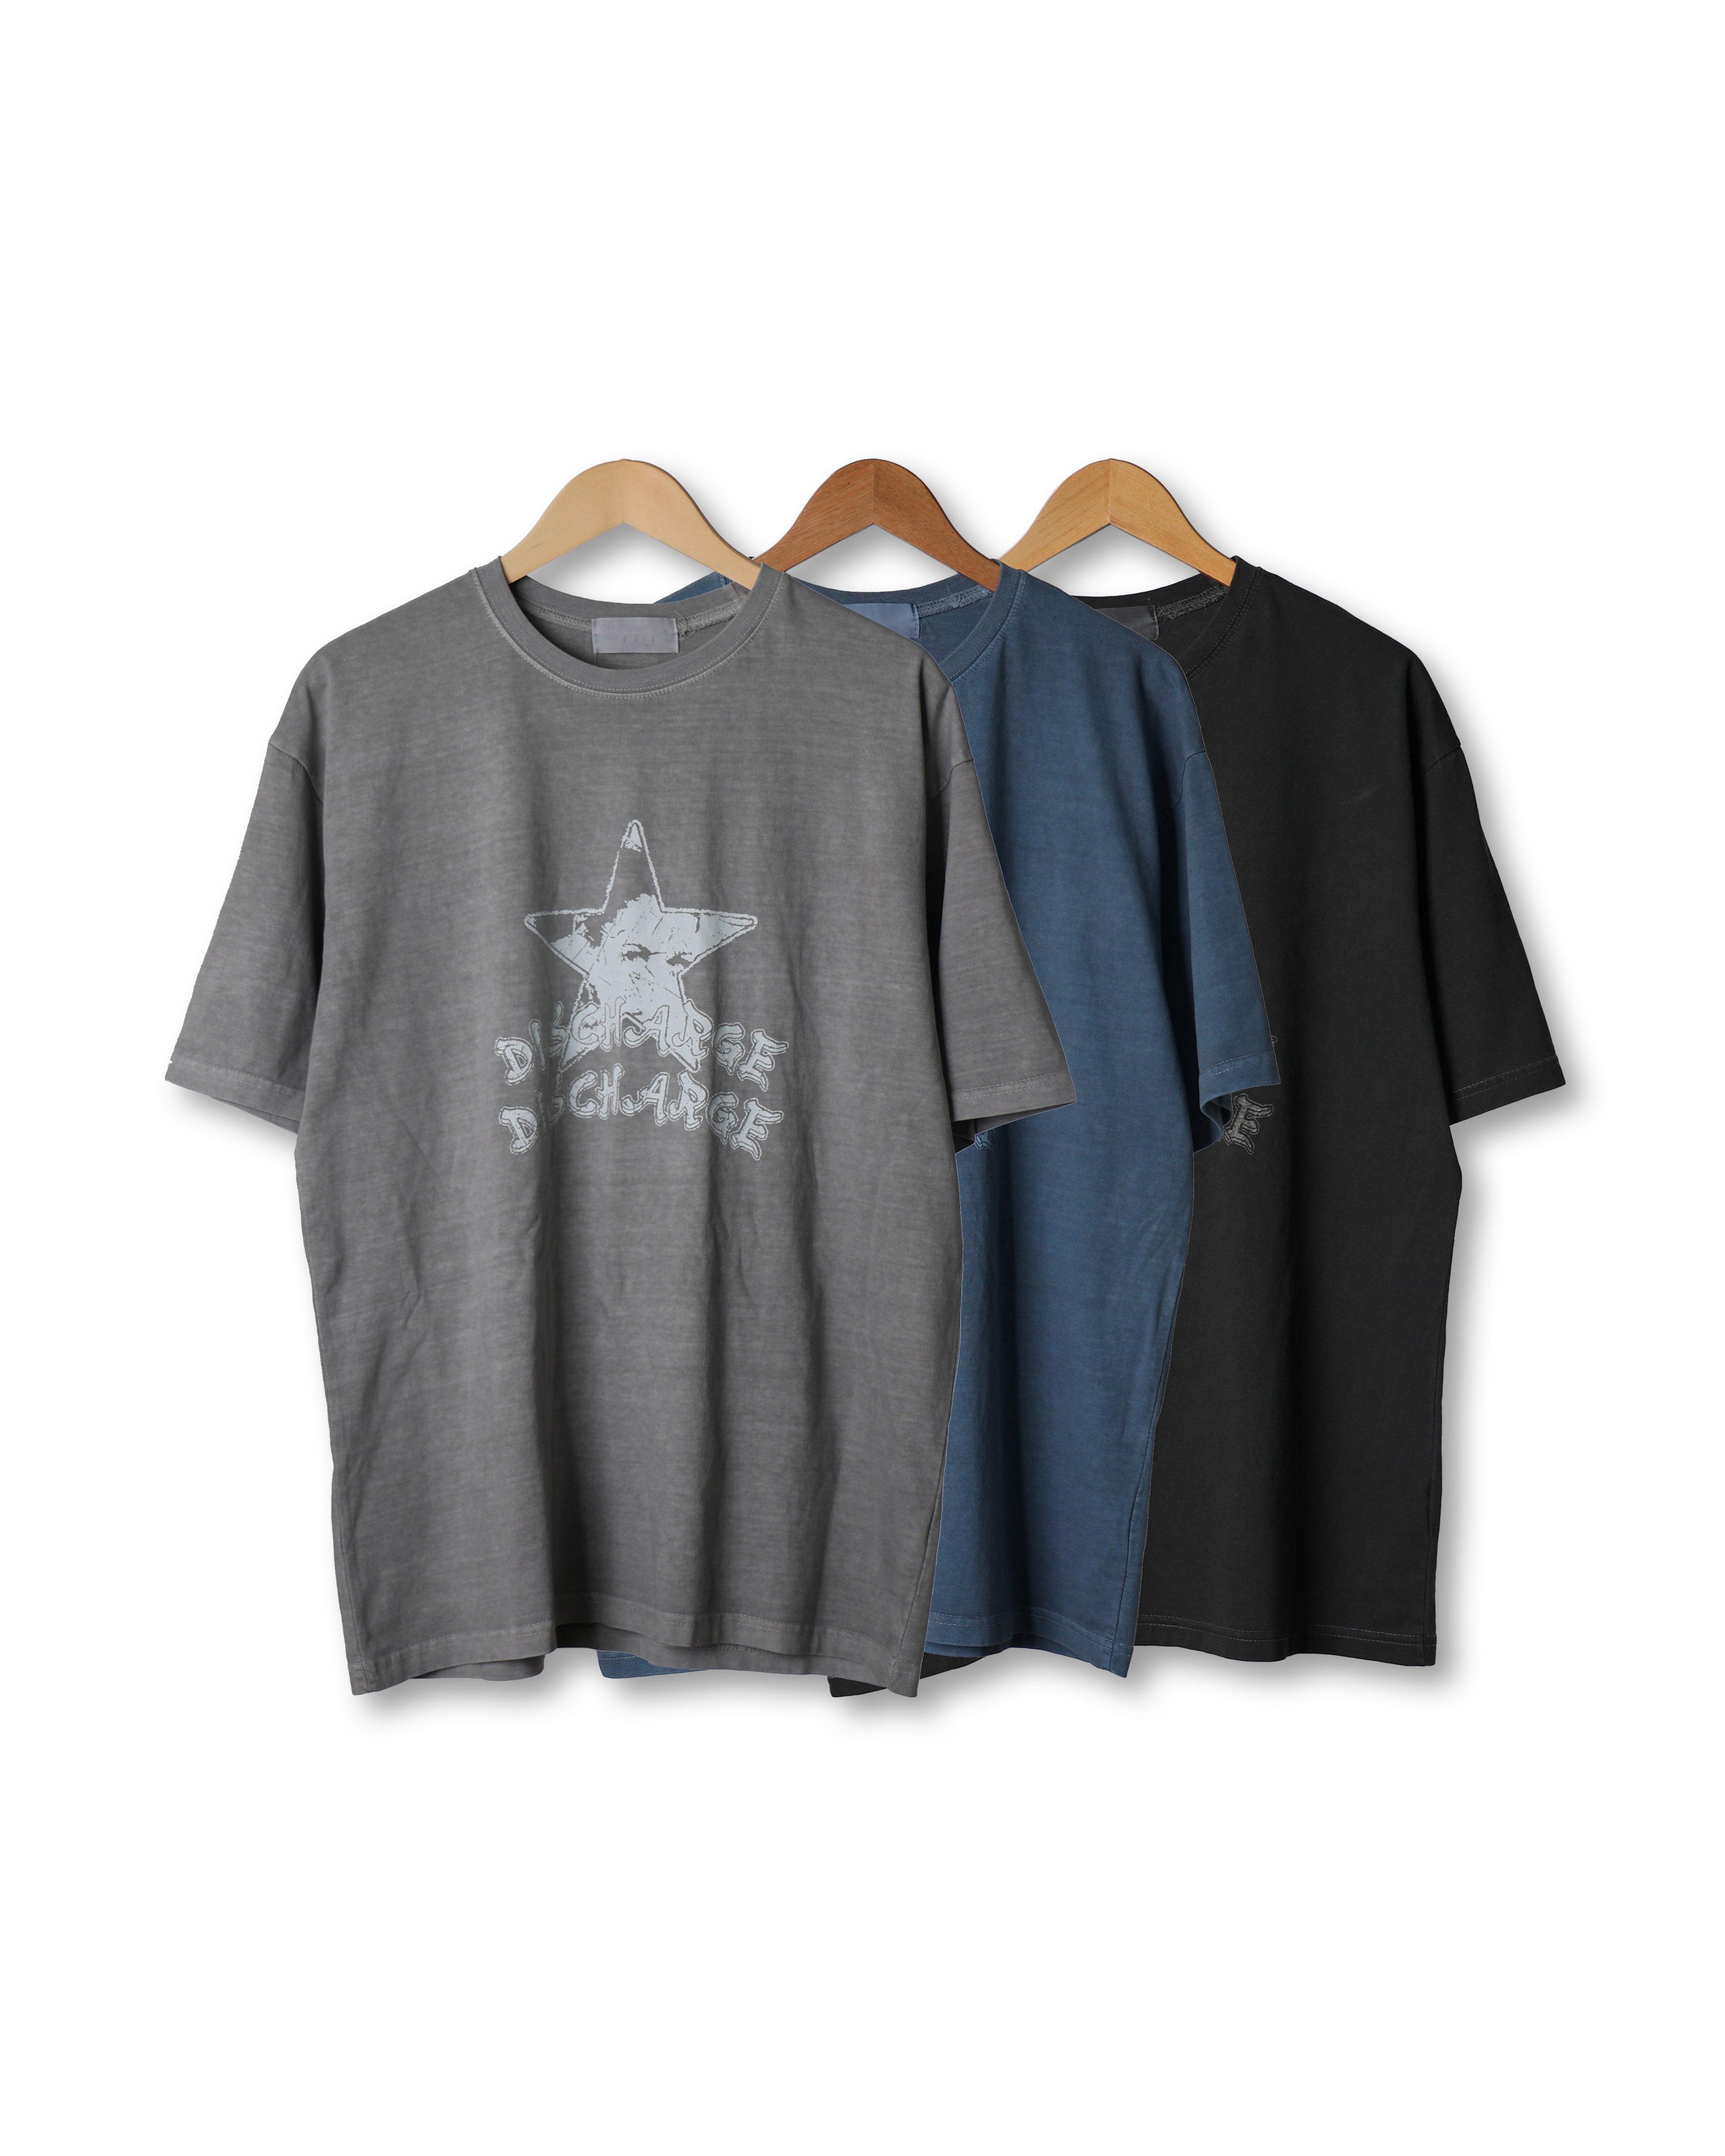 ROMOR STAR Pigments Loose T Shirts (Charcoal/Gray/Blue)